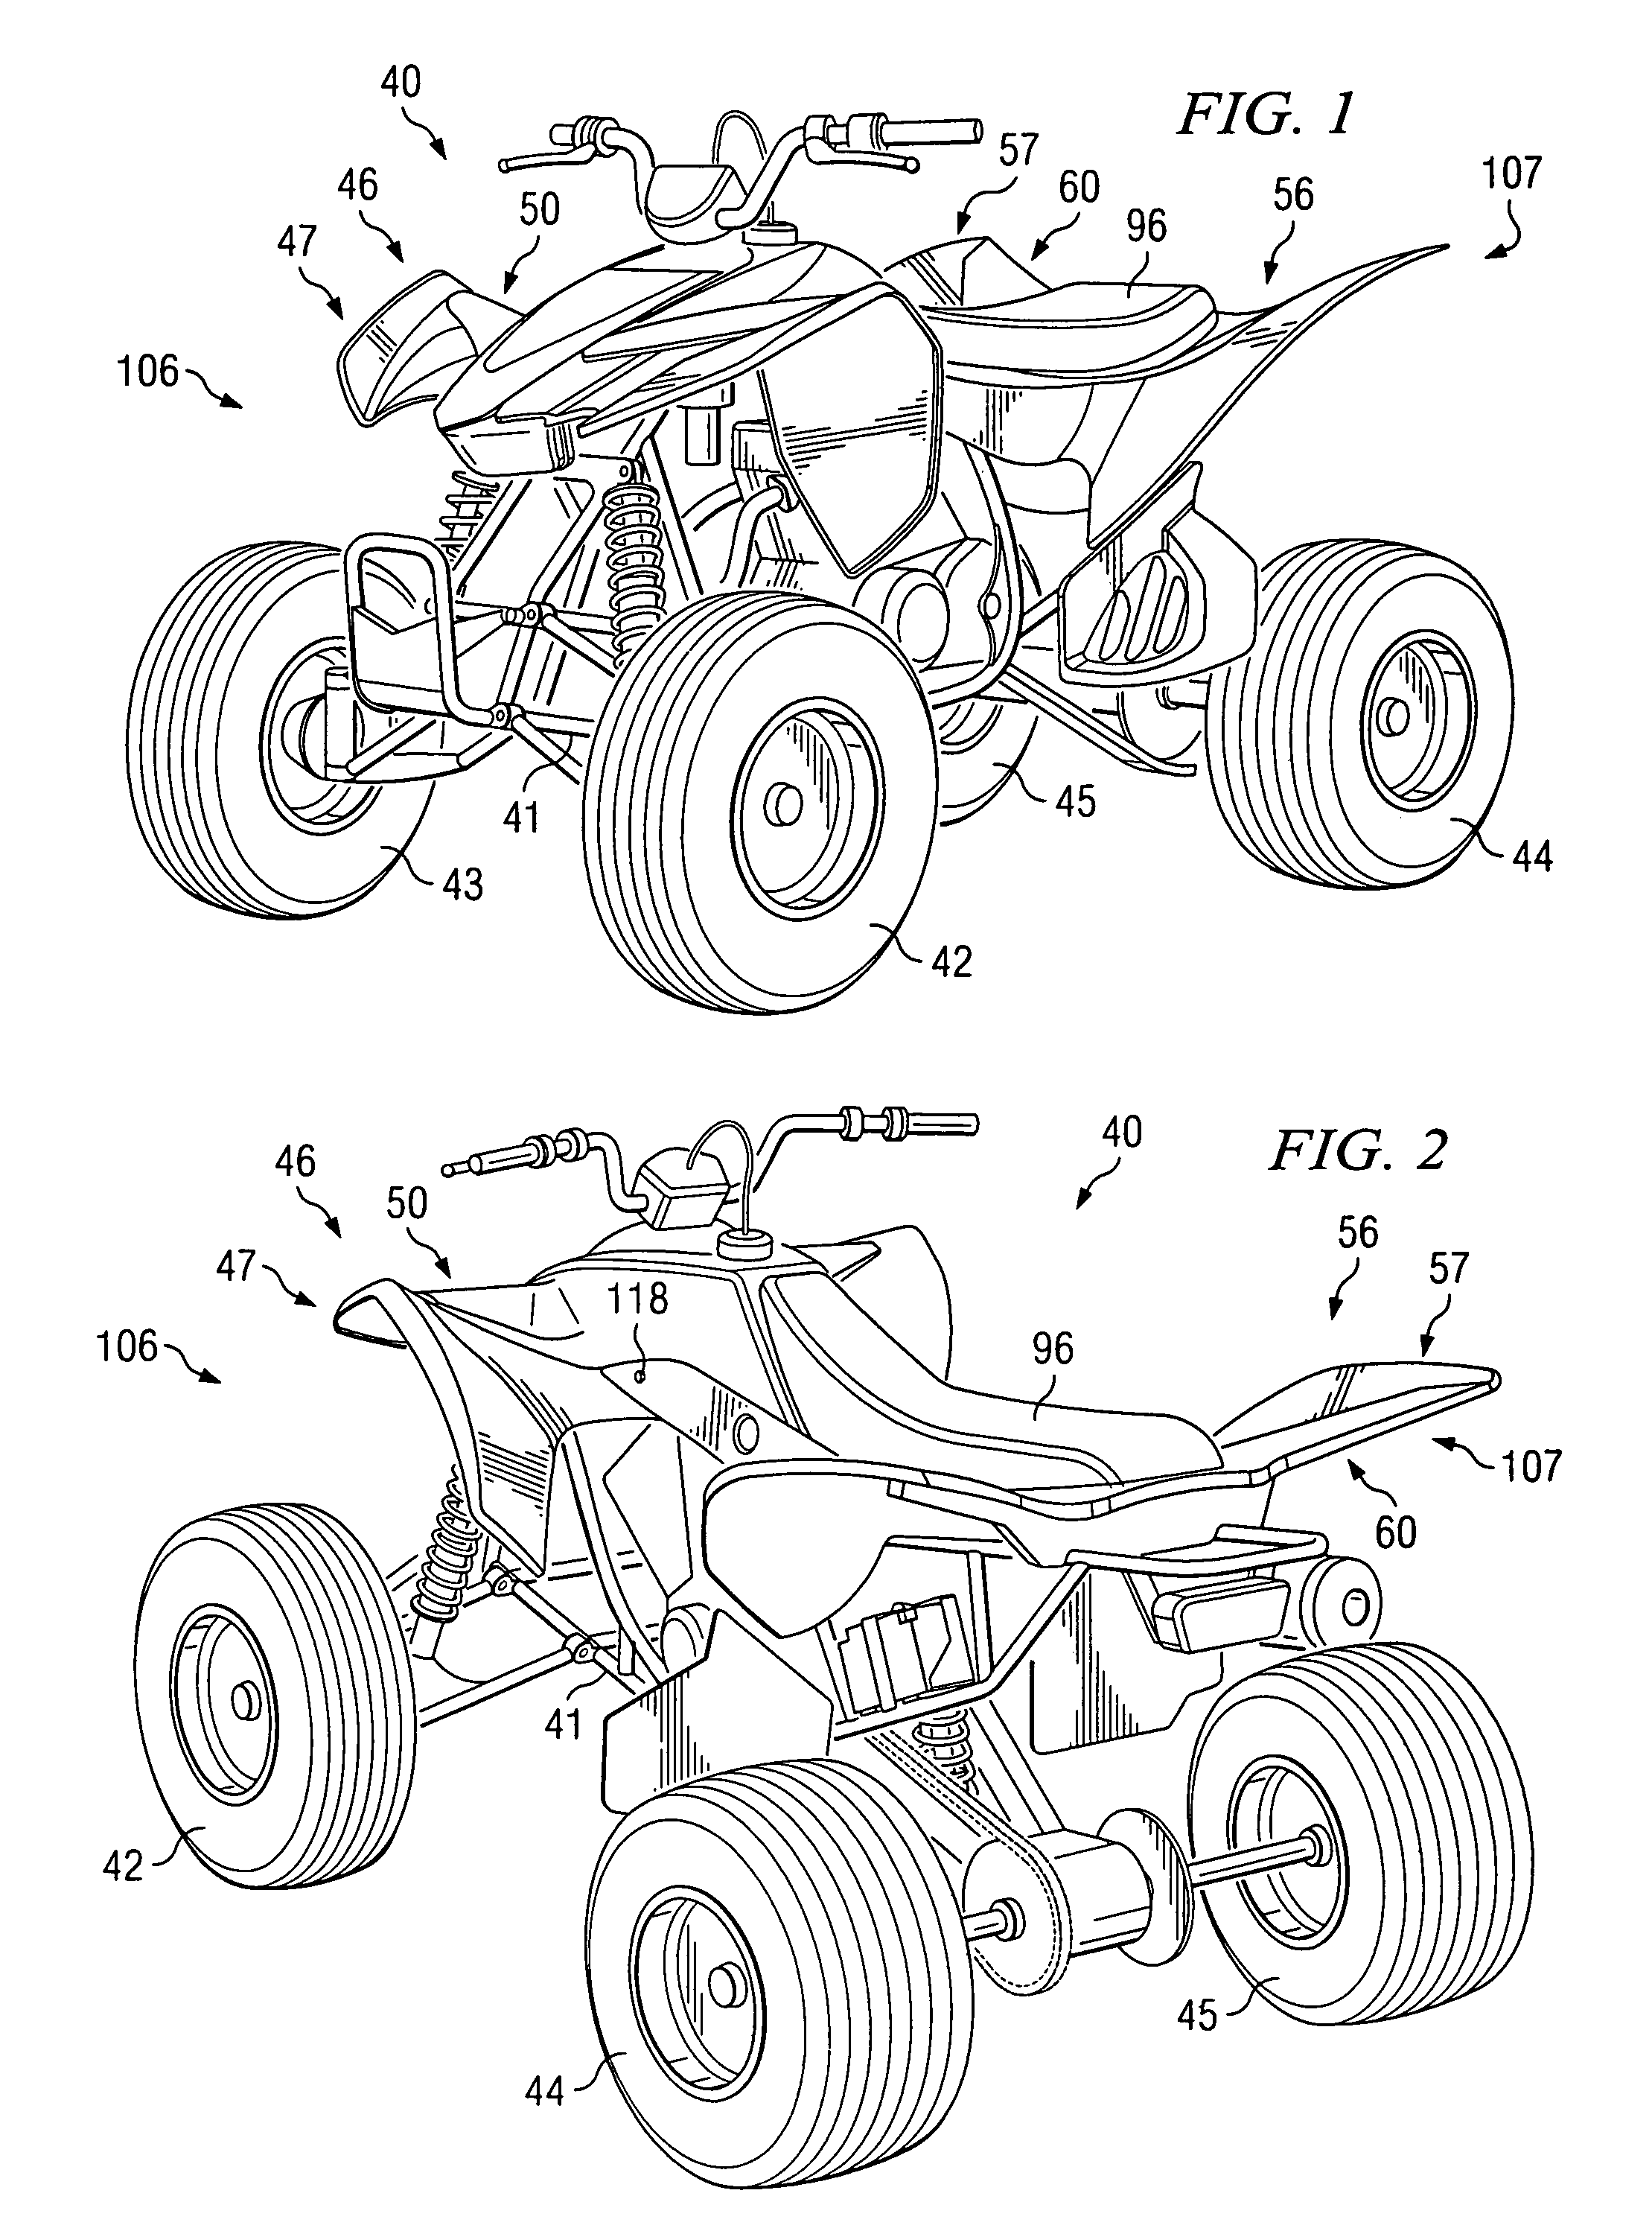 Vehicles having fastener extending into apertures of respective body panels and methods